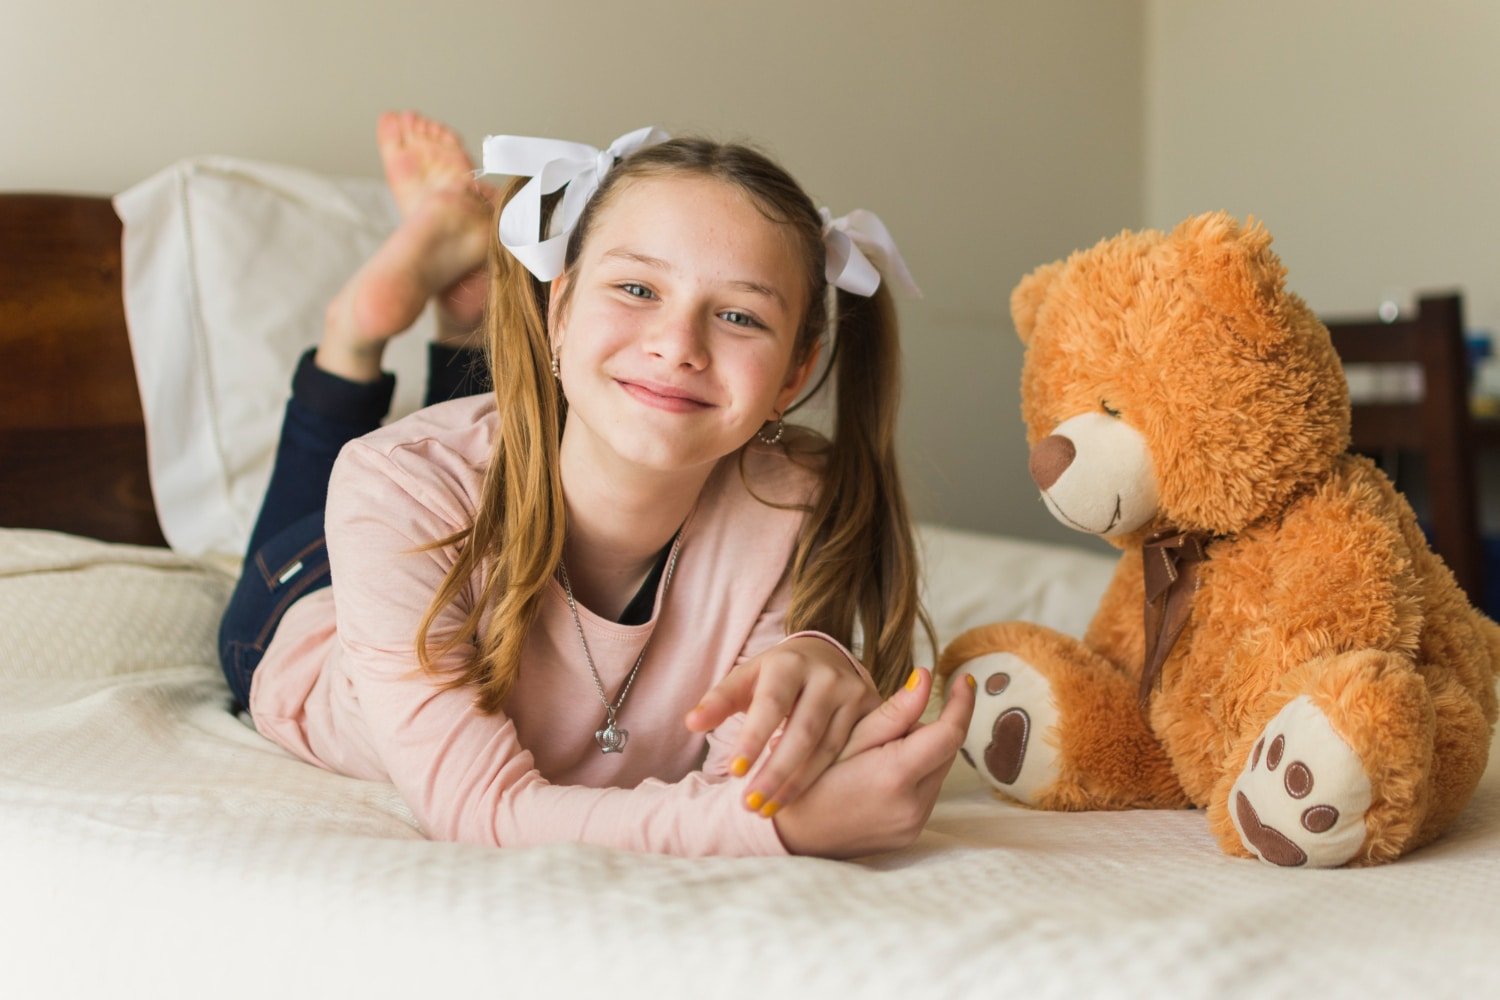 Cuddle Up With Slumberkins’s Soft And Educational Children’s Plush Toys